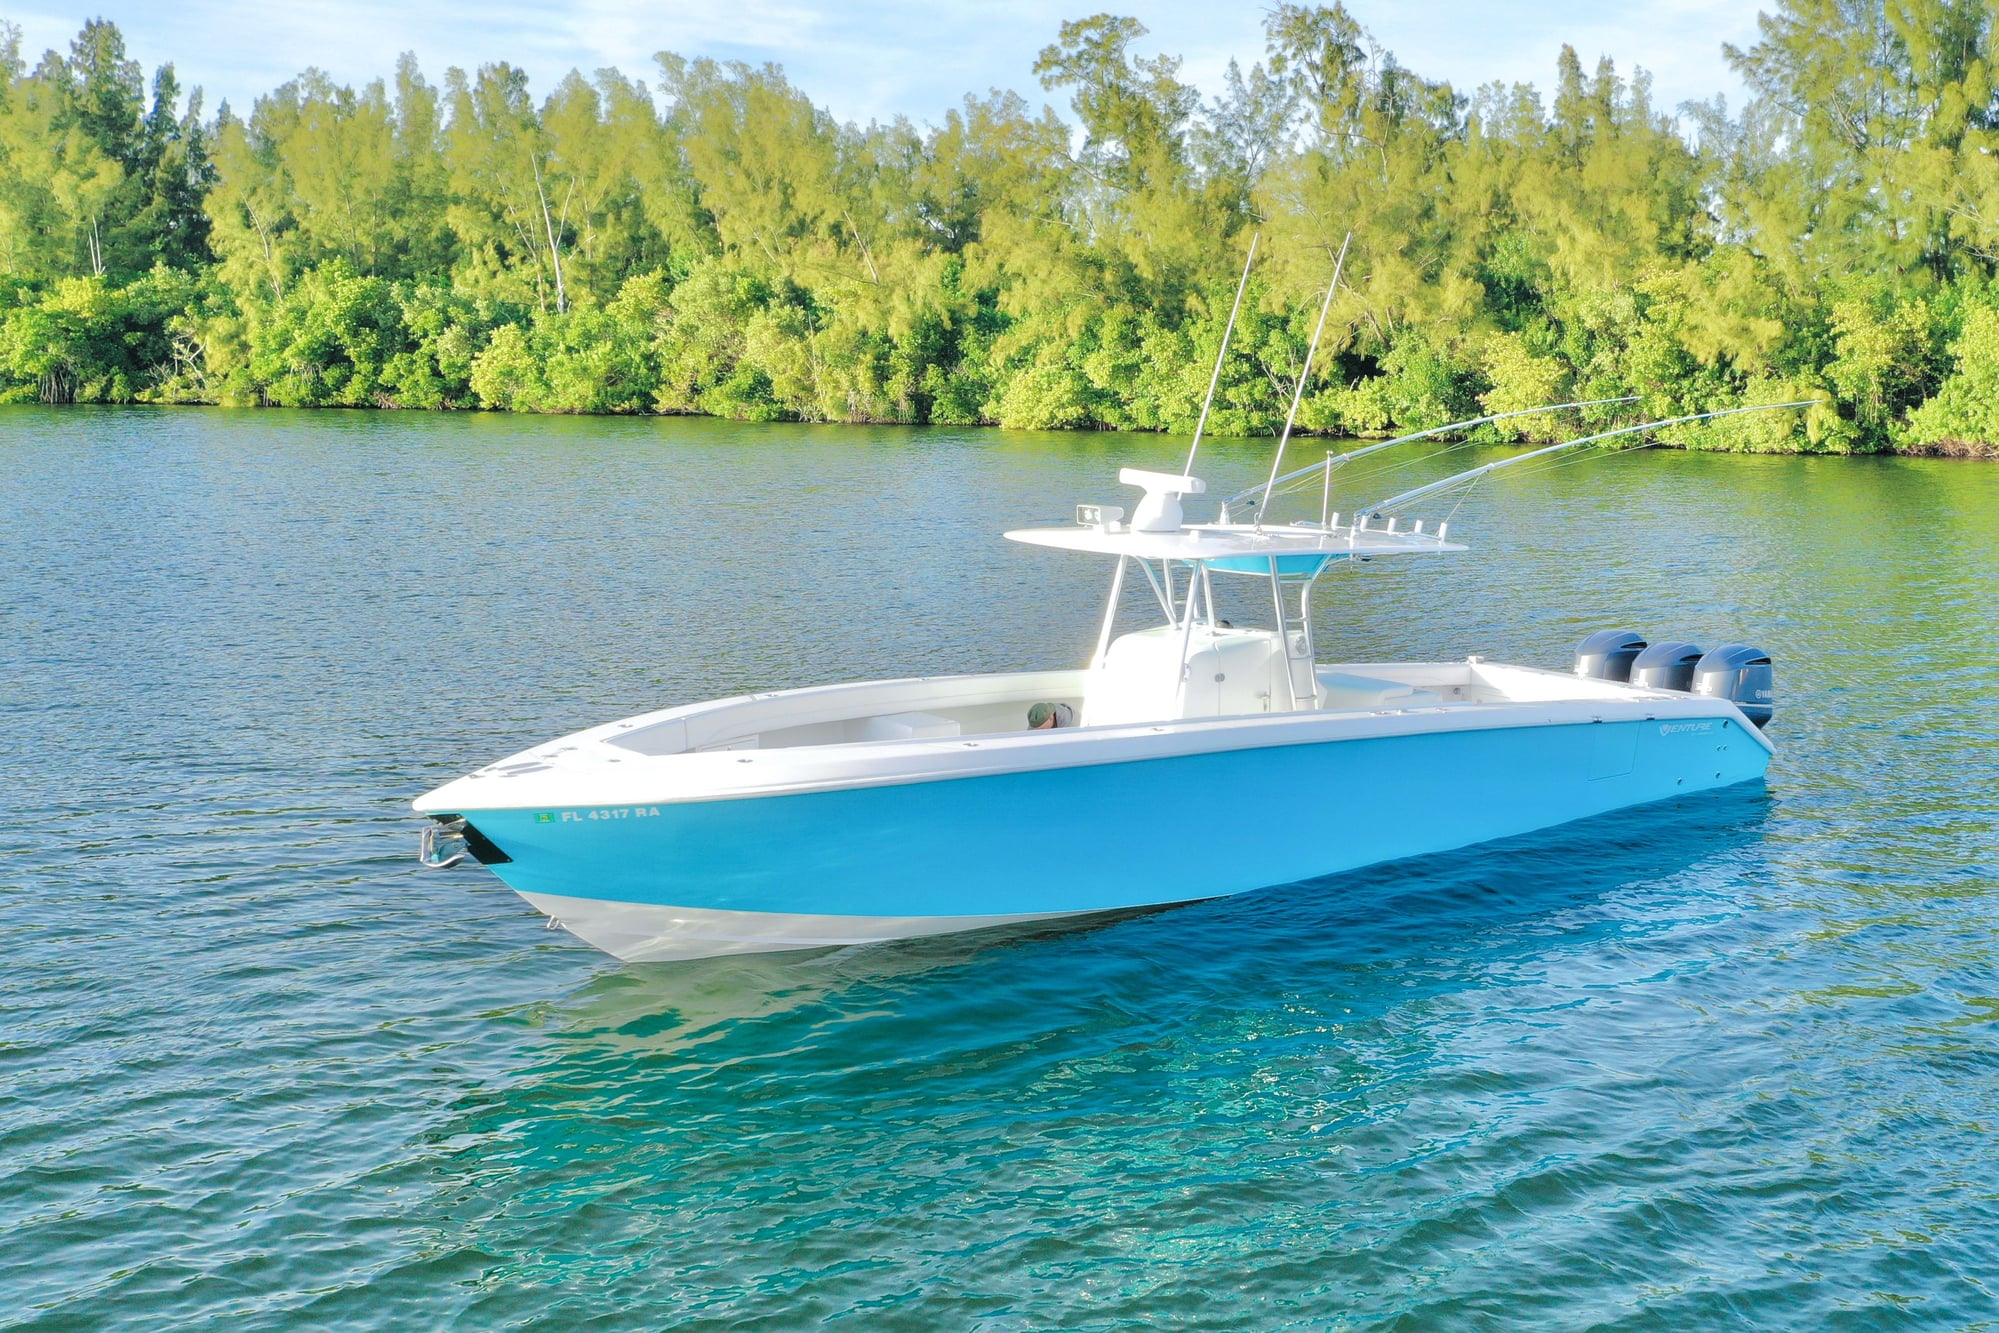 2016 39' Venture for sale. - The Hull Truth - Boating and Fishing Forum